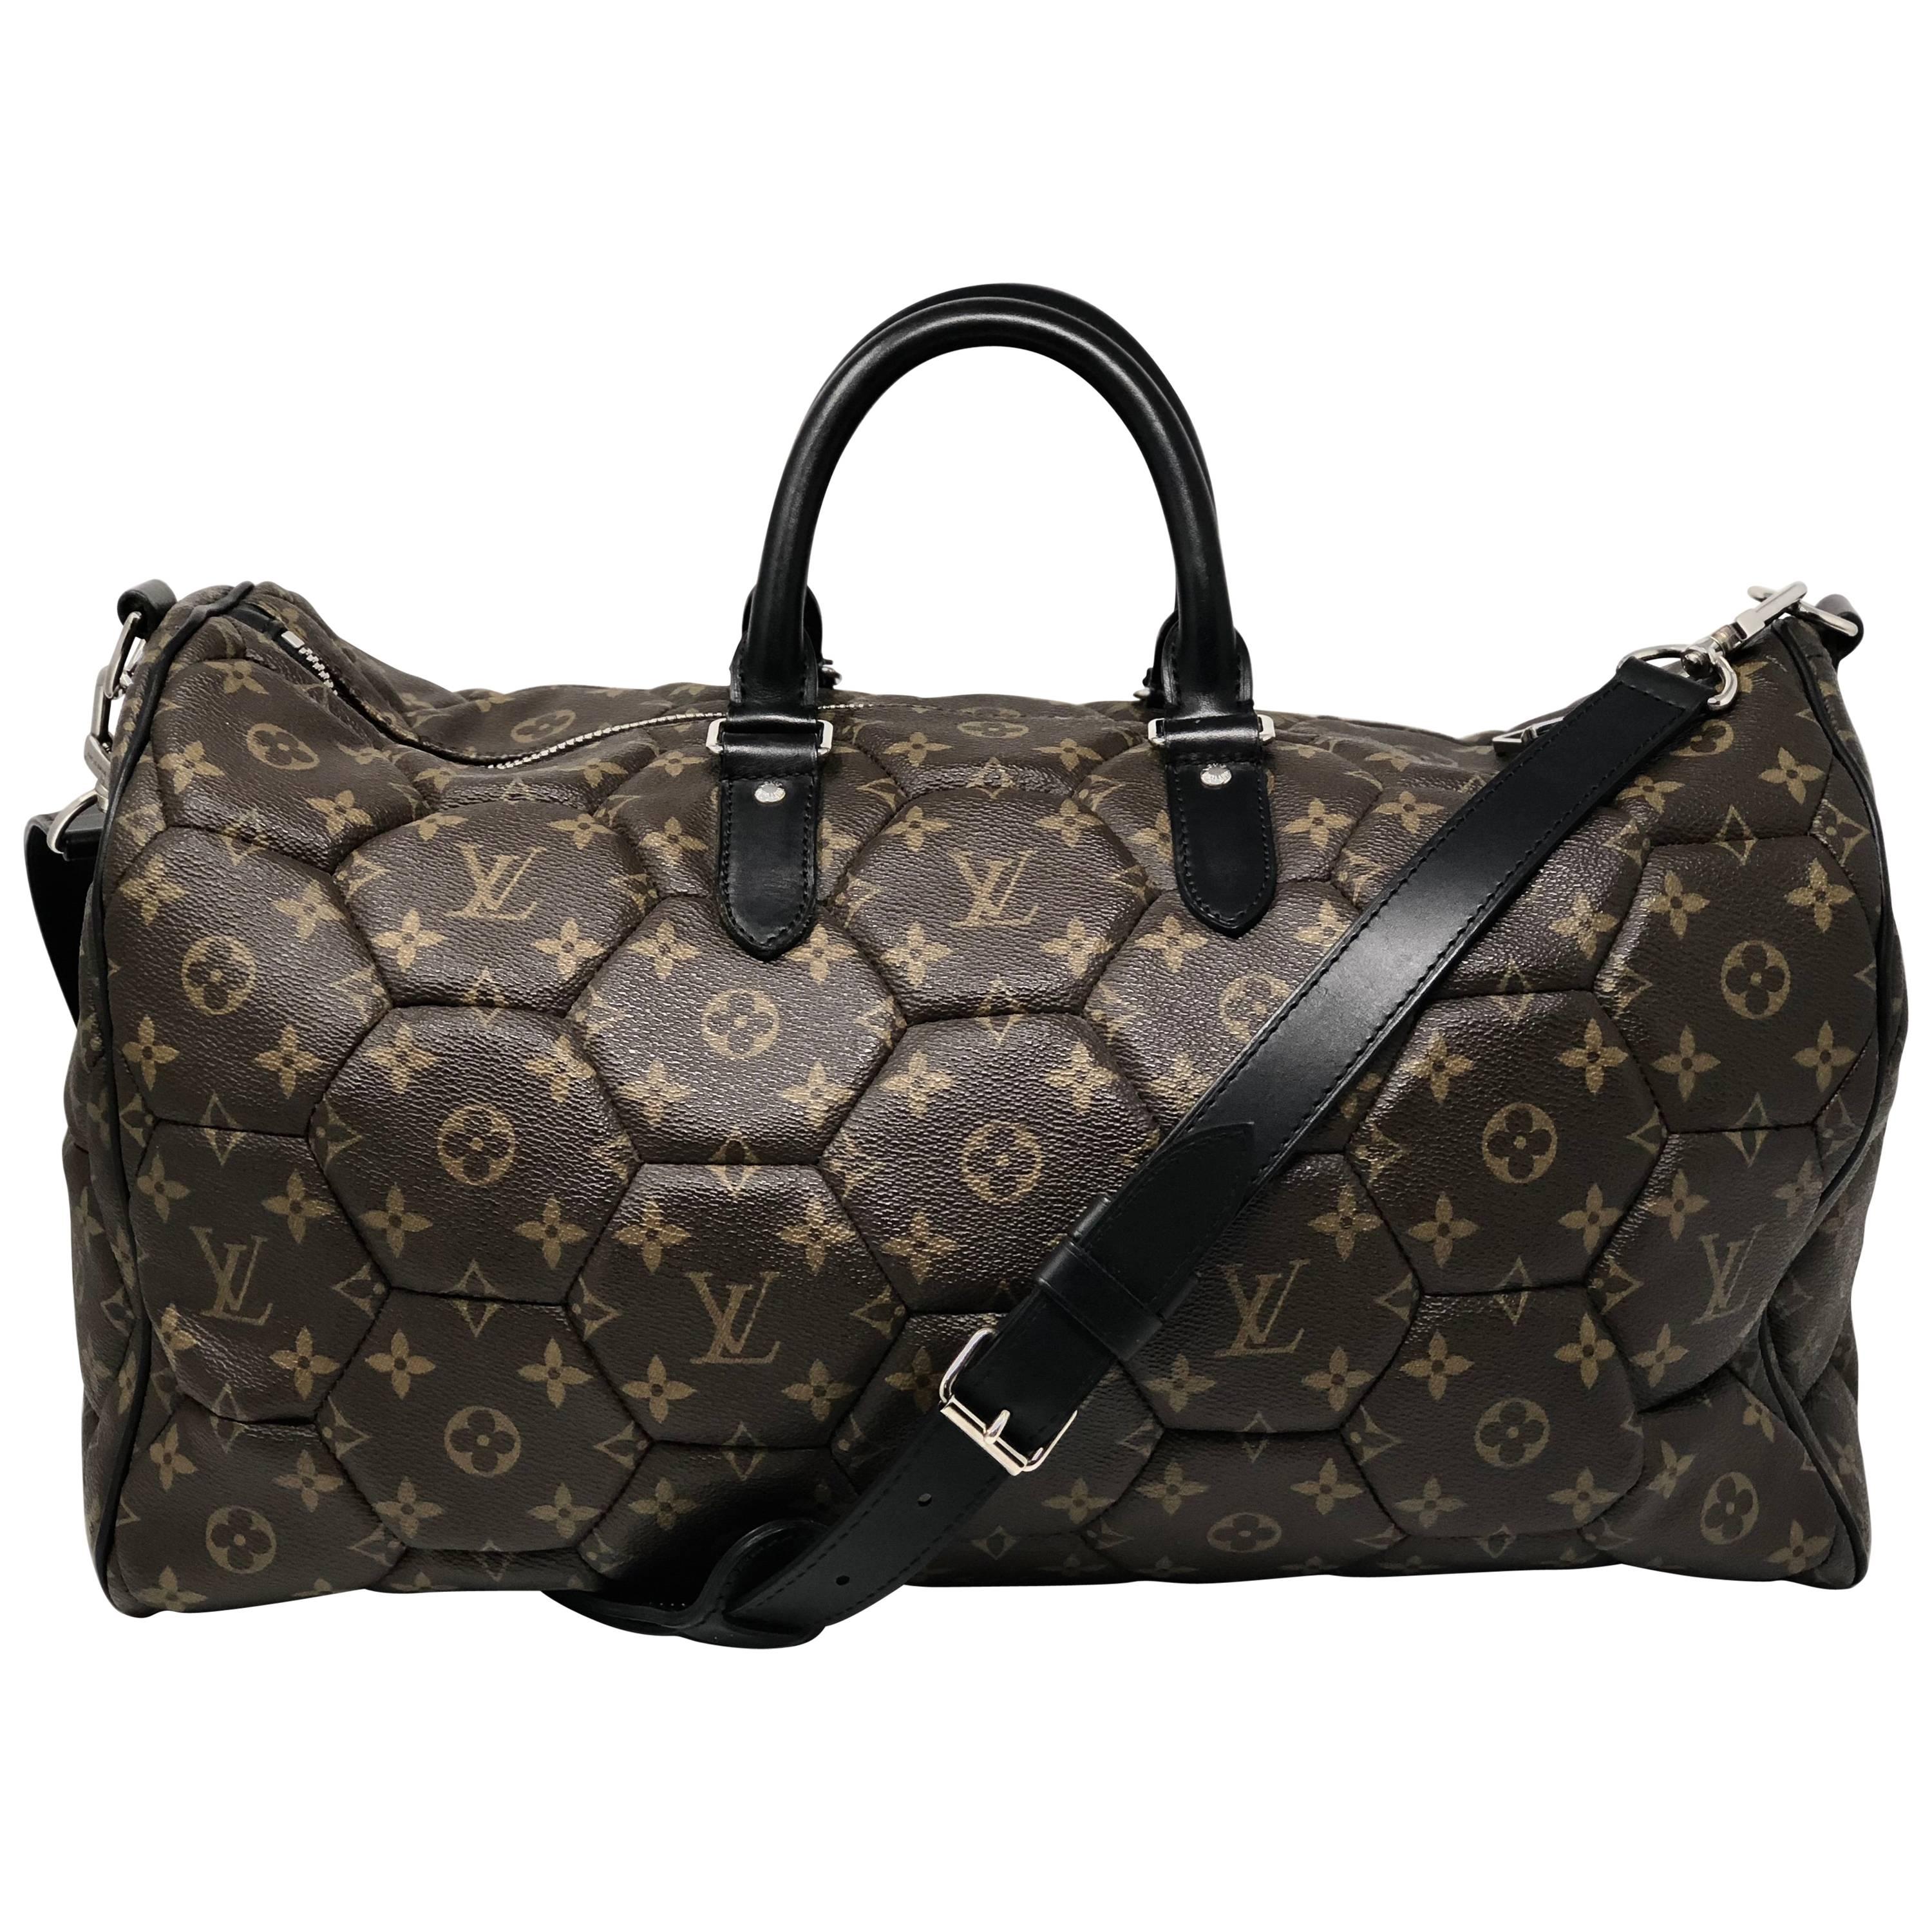 Louis Vuitton 2009 pre-owned Keepall 50 Holdall Bag - Farfetch